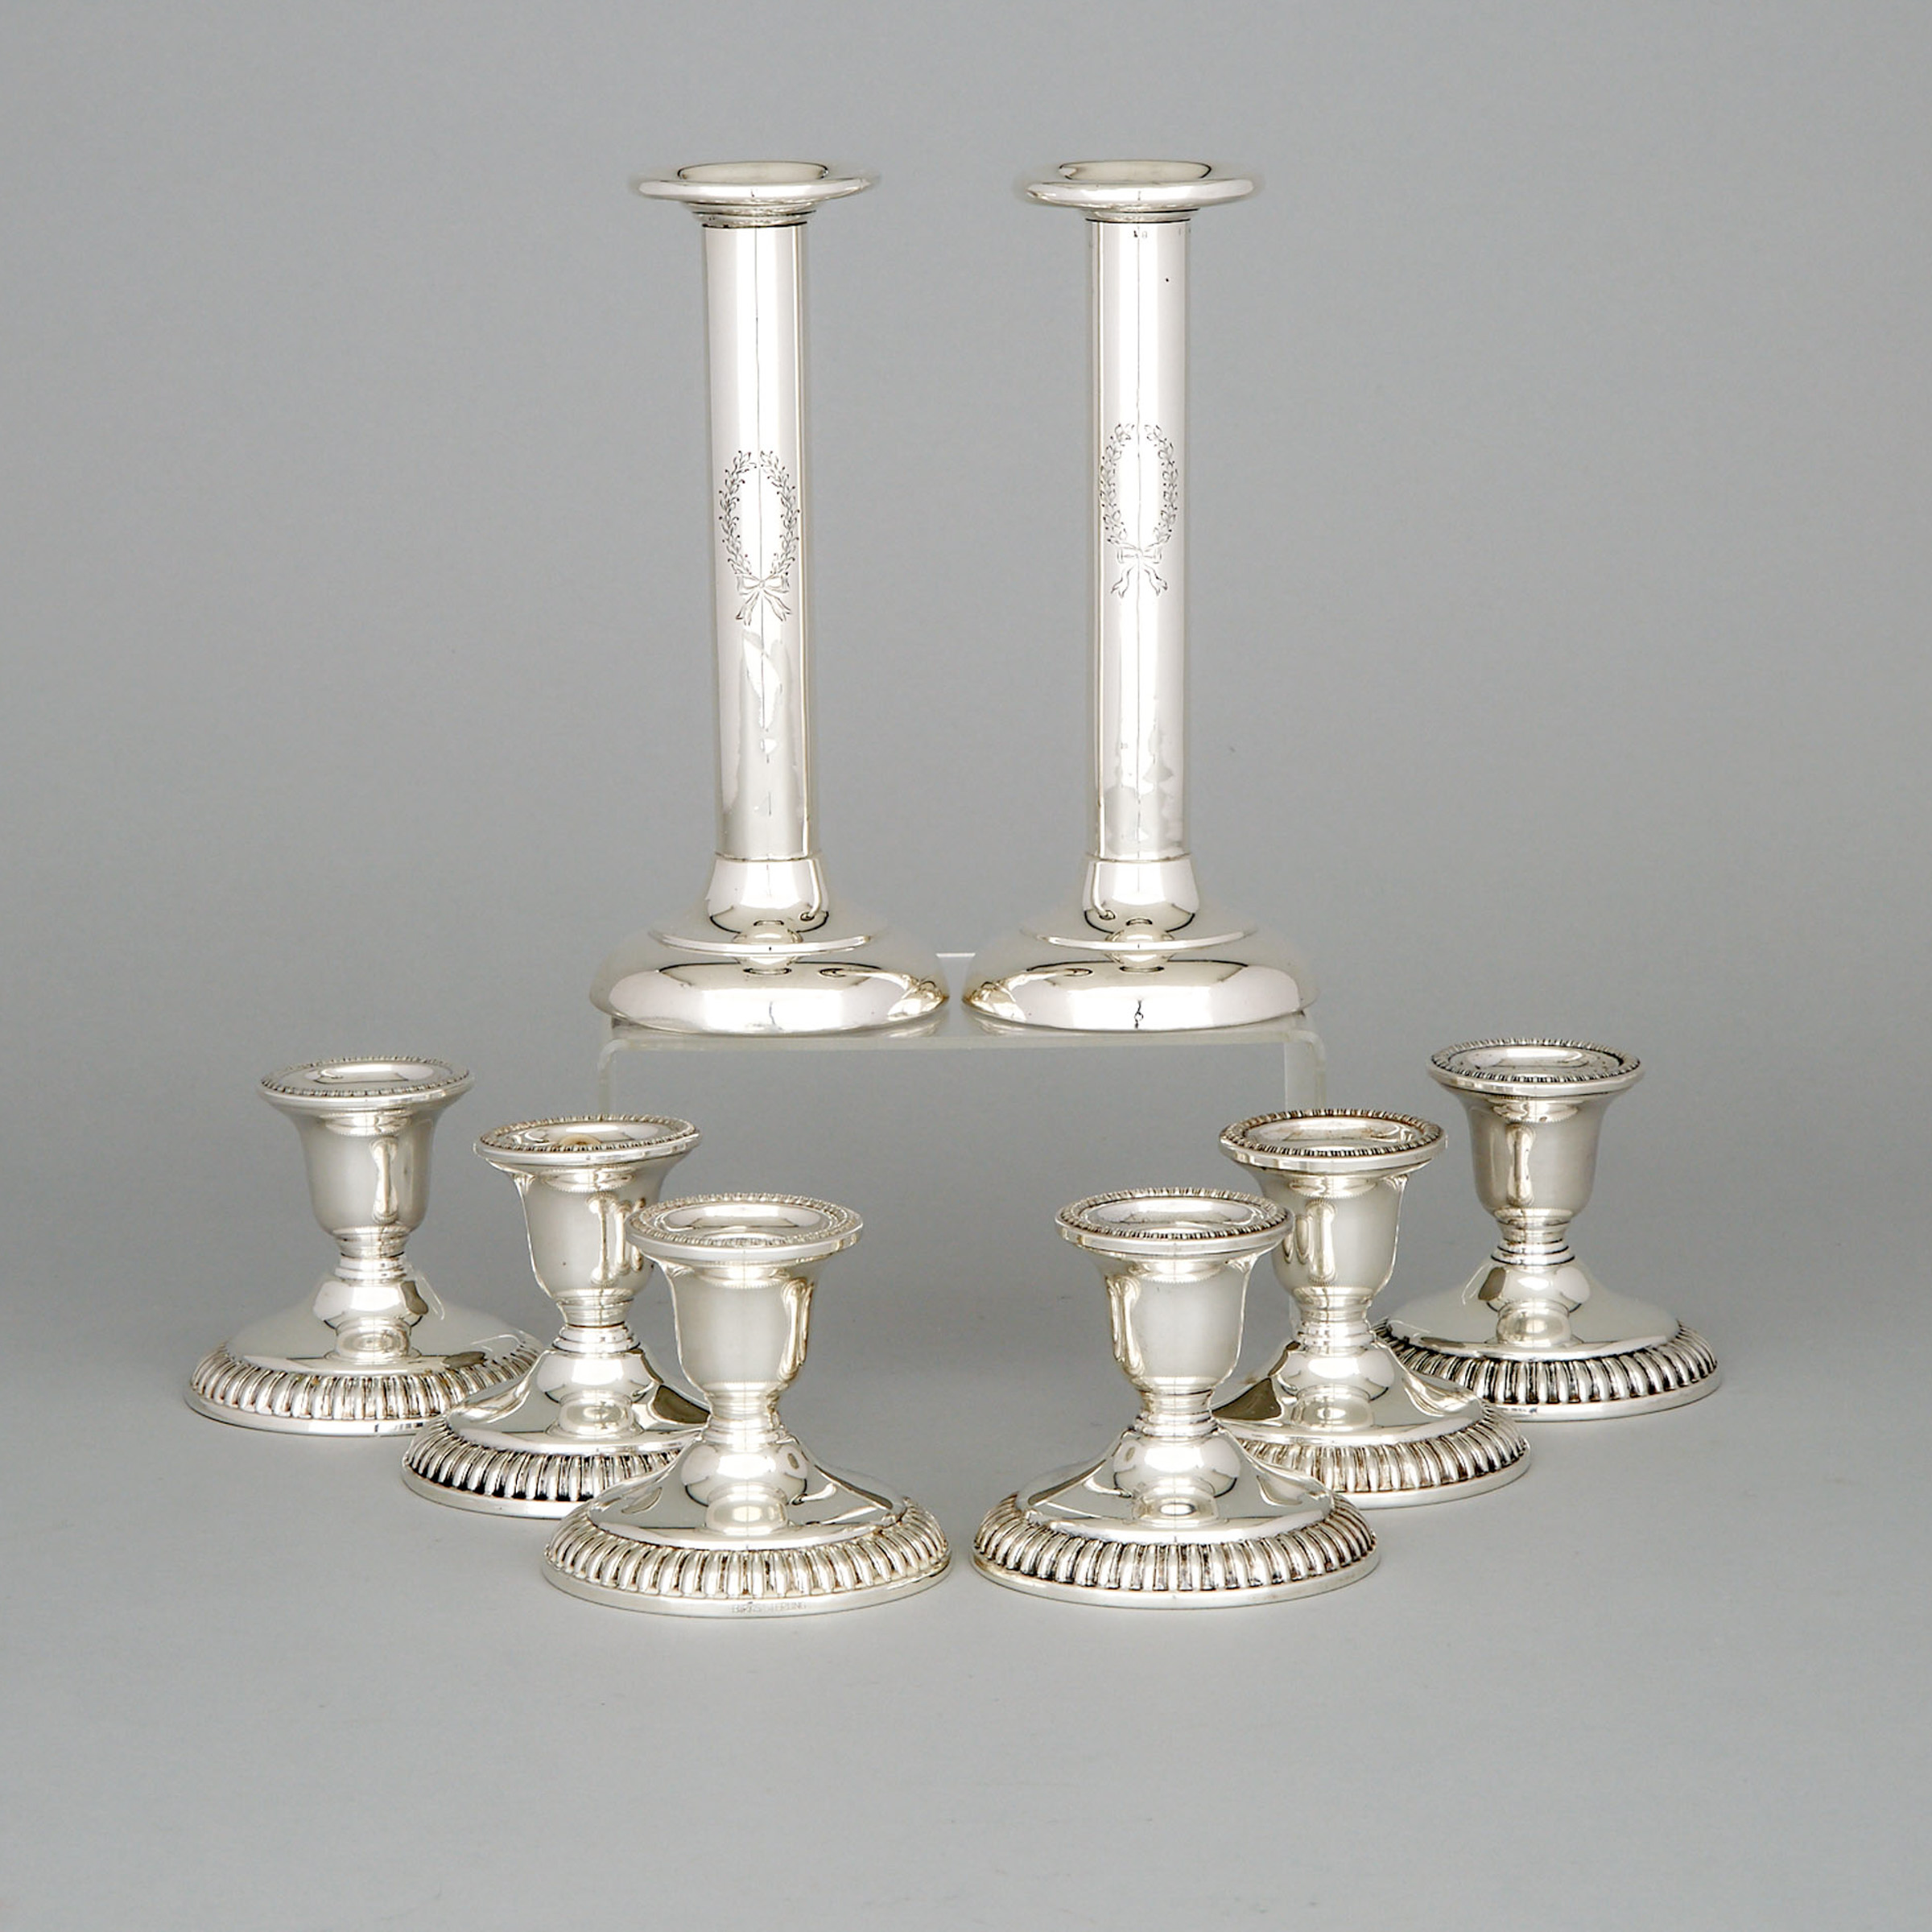 Eight Canadian Silver Candlesticks, Henry Birks & Sons, Montreal, 1904-24